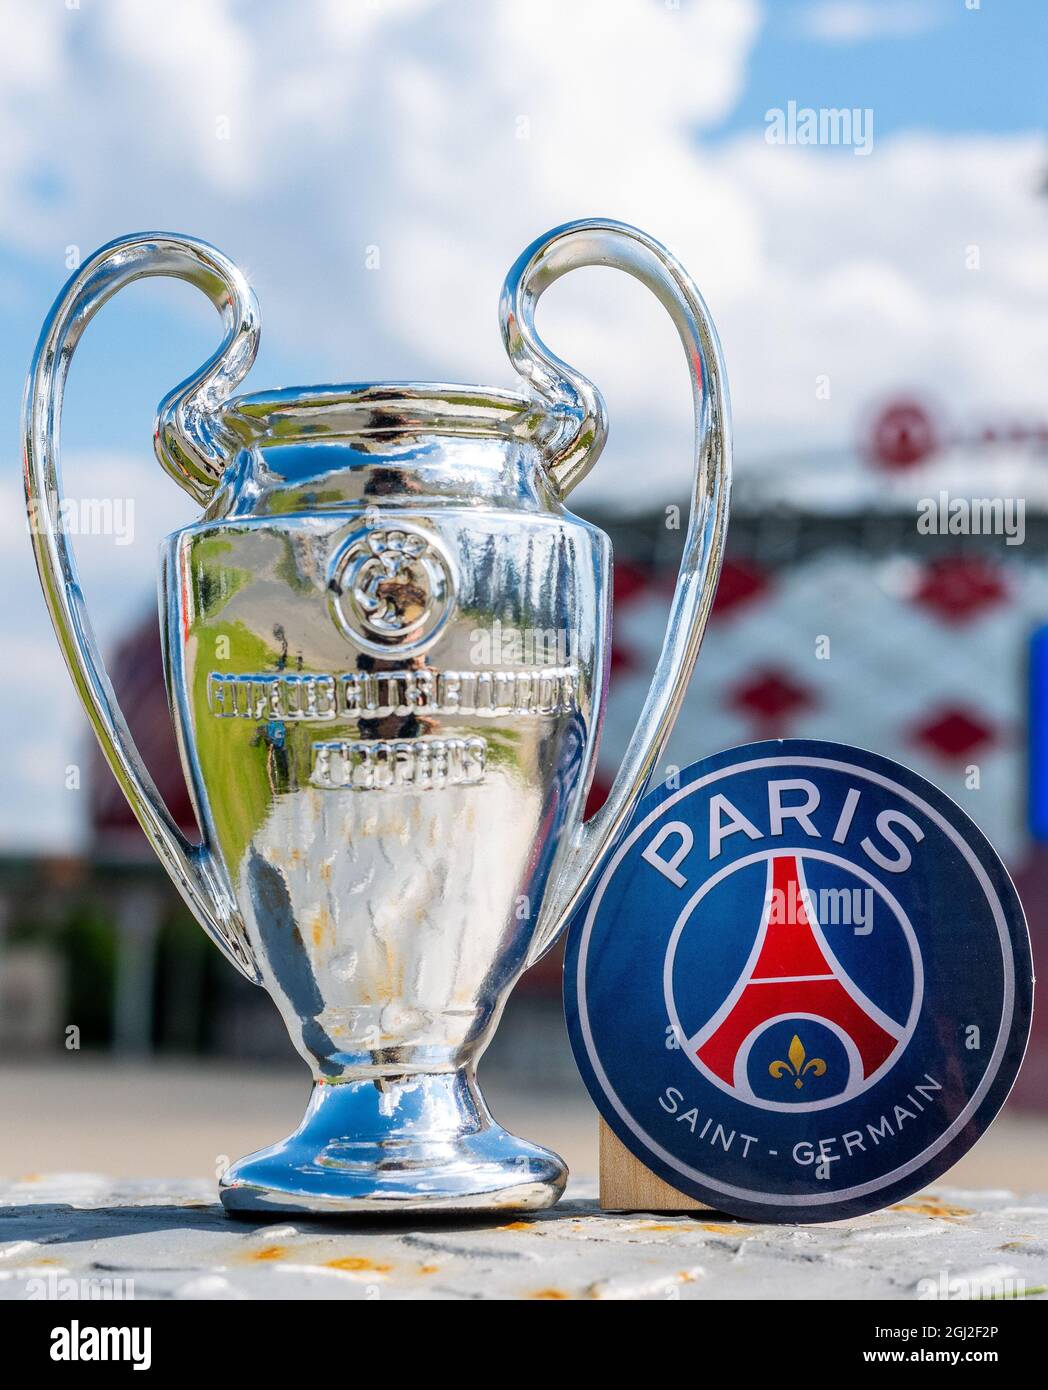 June 14, 2021 Paris, France. The emblem of the football club Paris Saint- Germain F.C. and the UEFA Champions League Cup against the backdrop of a  mode Stock Photo - Alamy